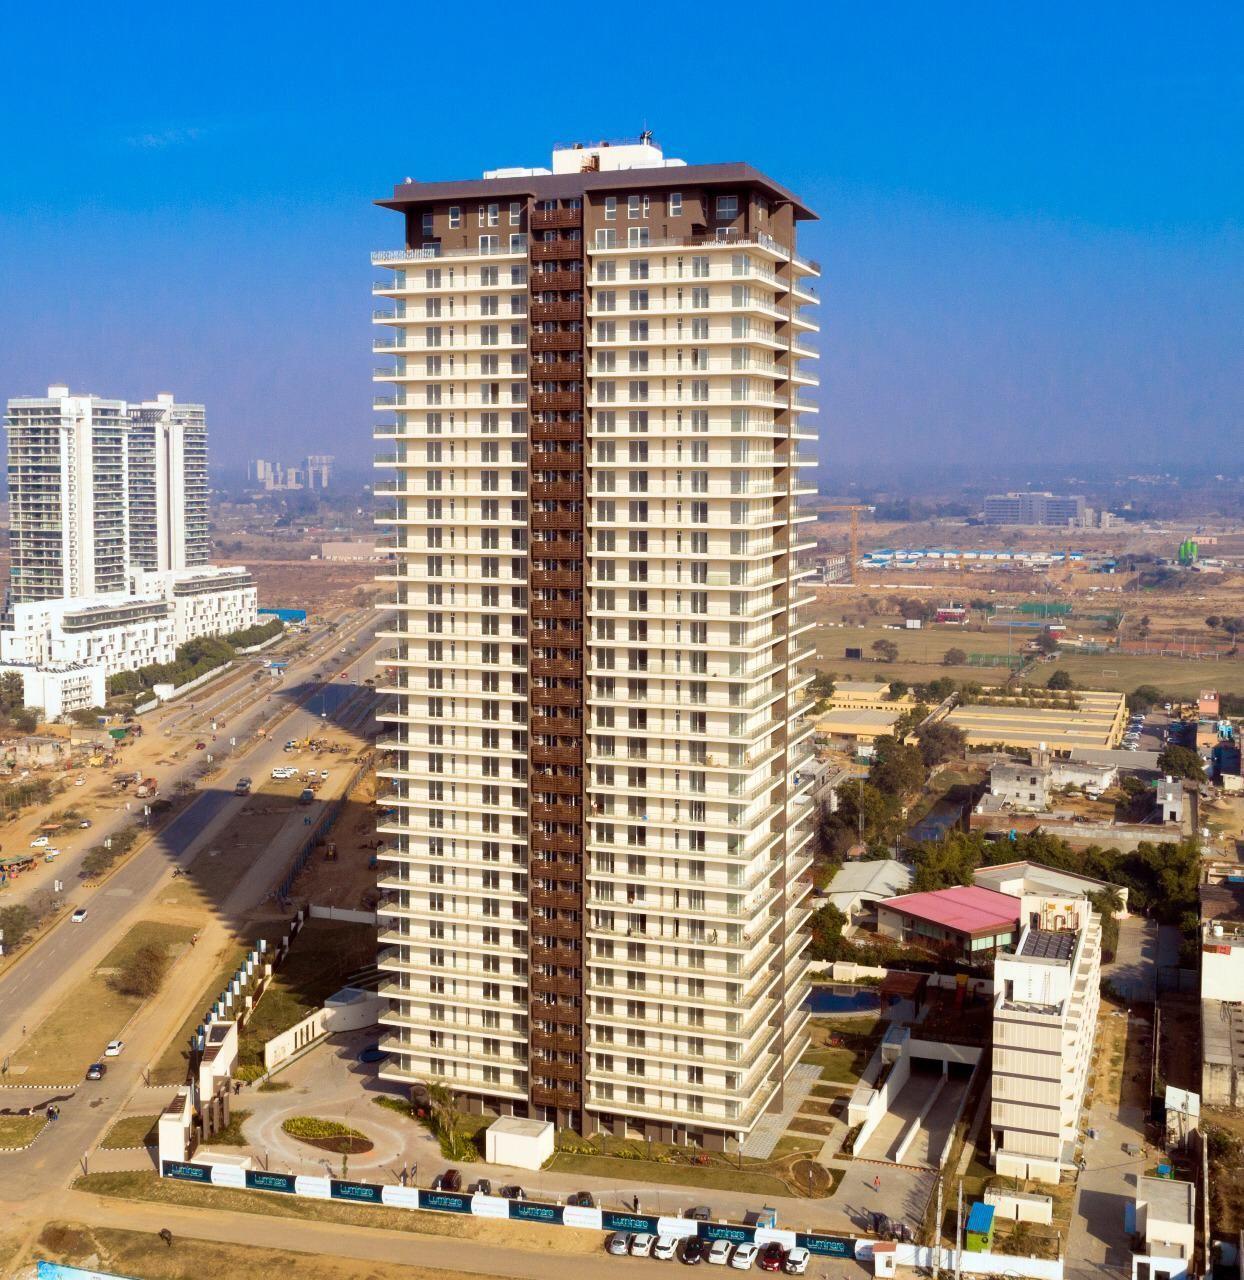 Mahindra Luminare Gurgaon - 3/4BHK Ultra Luxury Apartment Golf Course Extension Road Sector 59